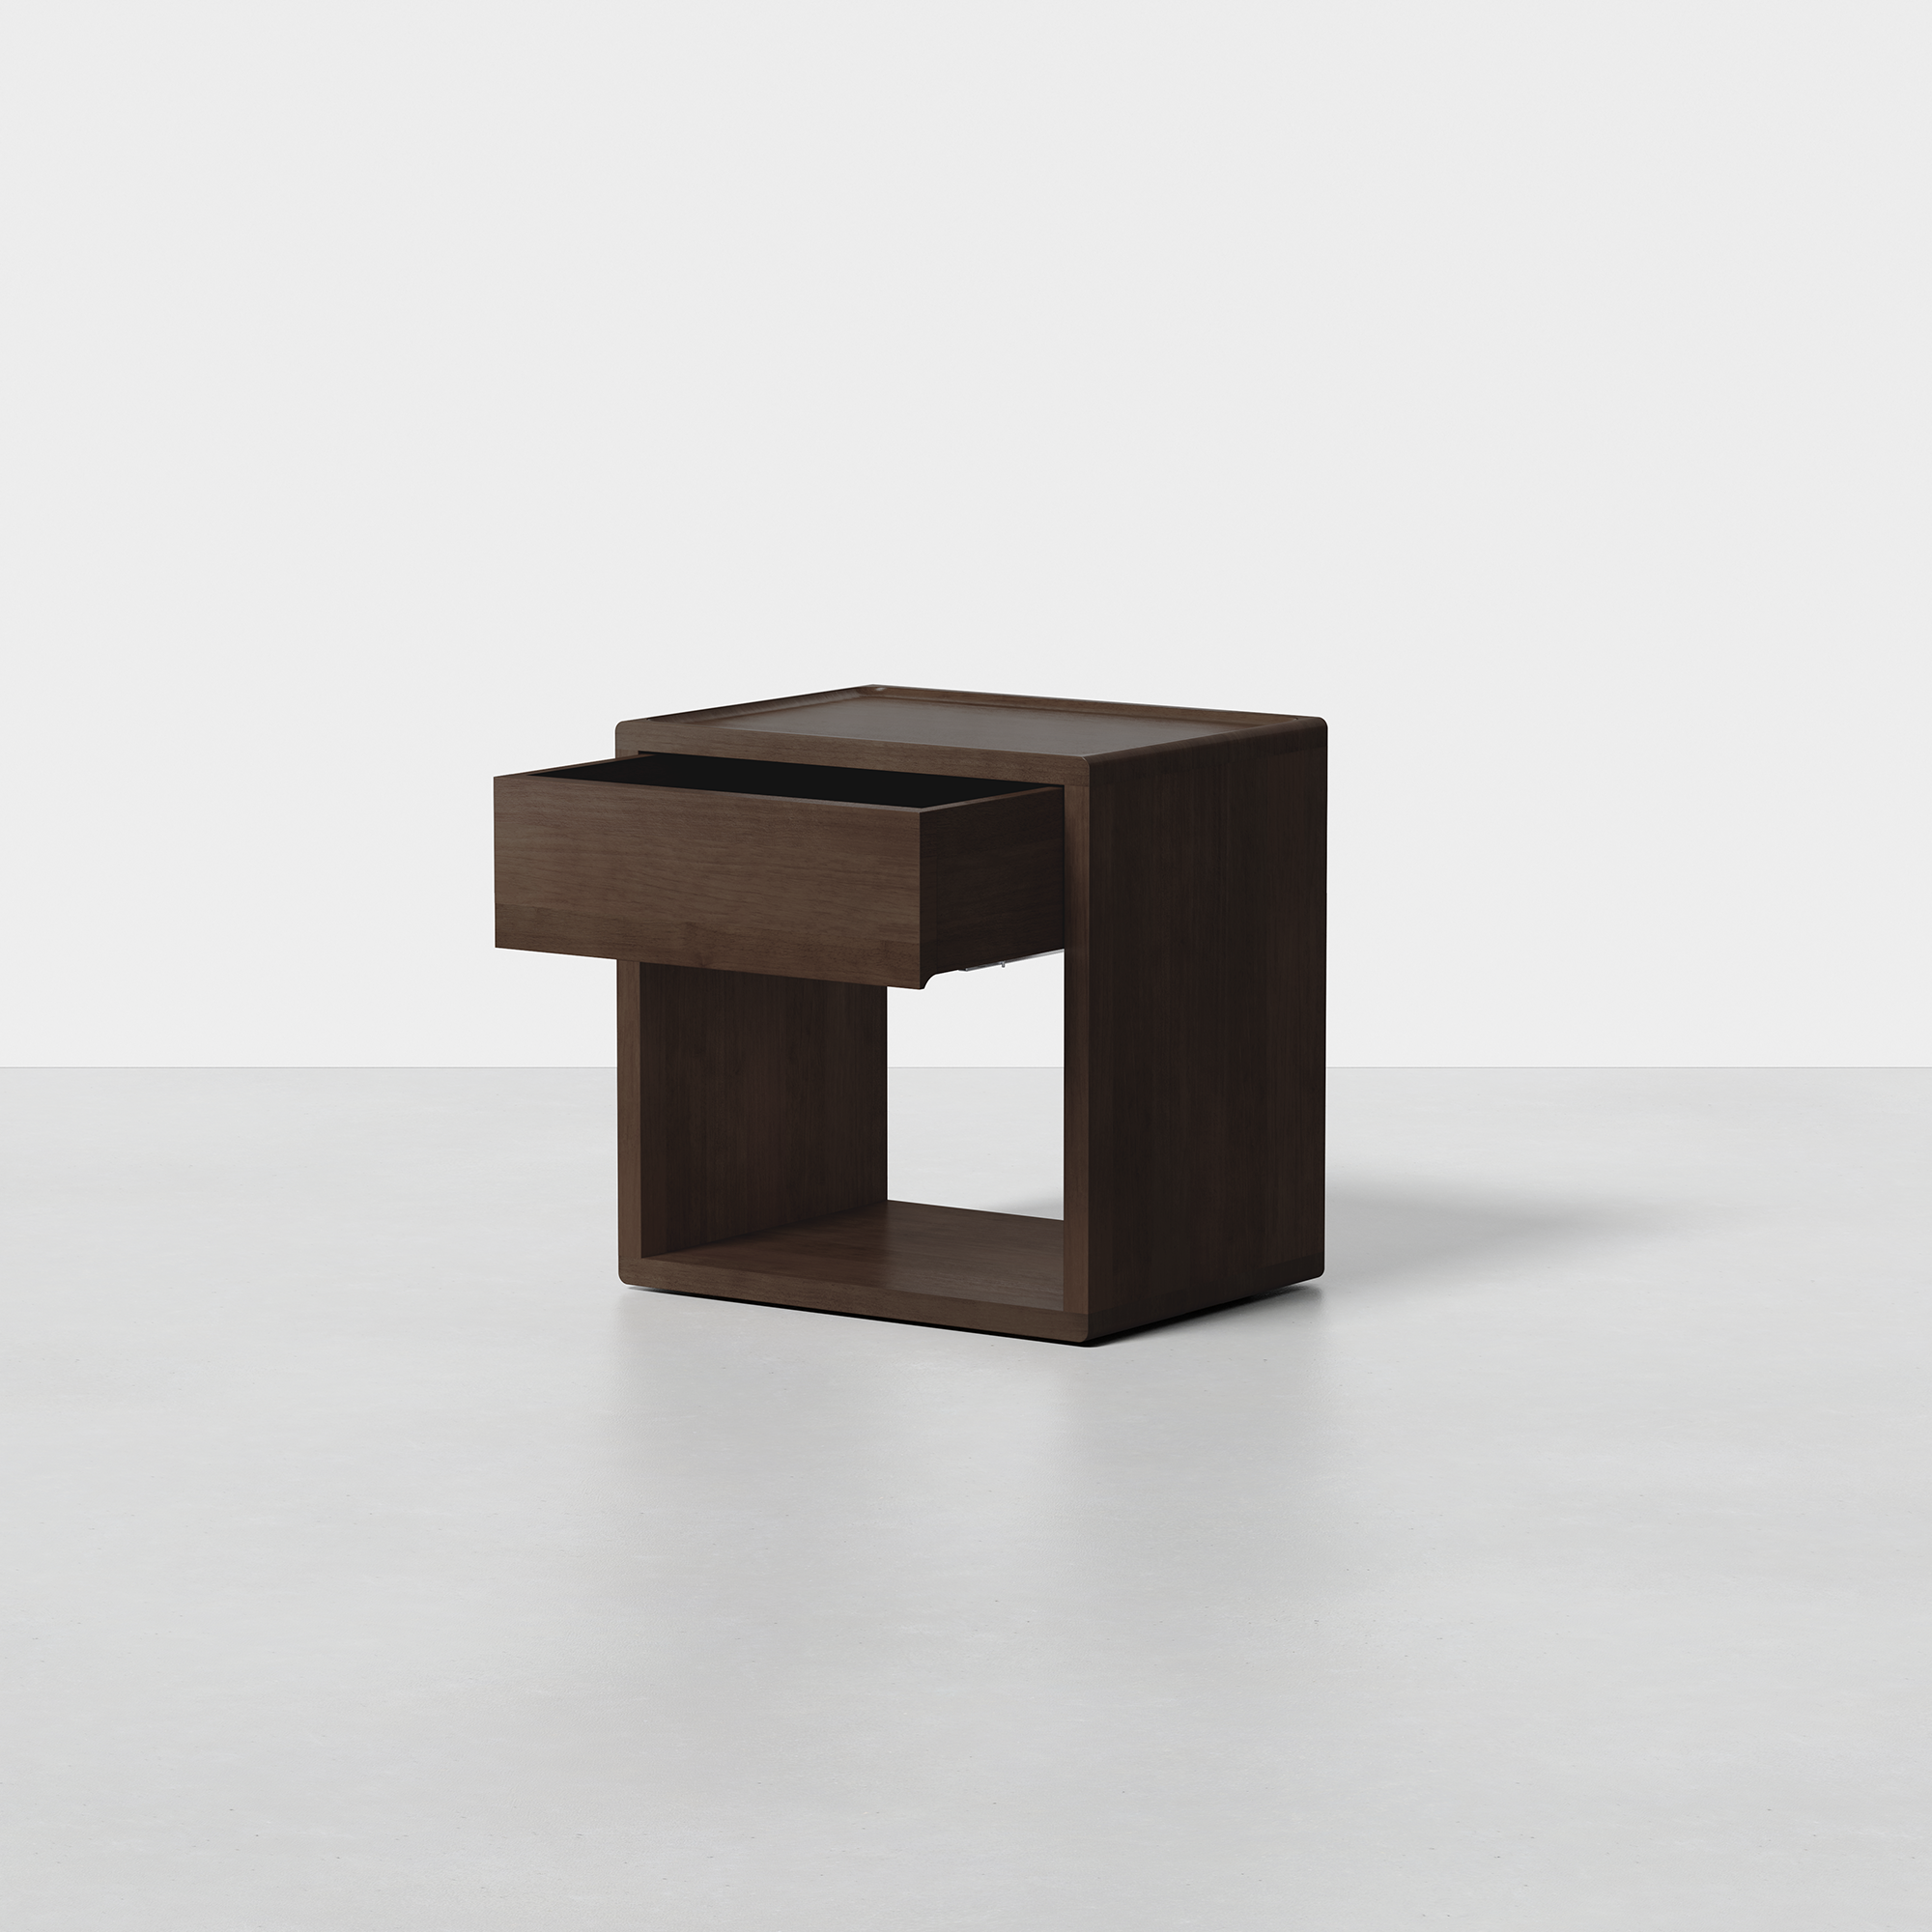 PDP Image: The Nightstand (Espresso) - Render - Side, Drawer